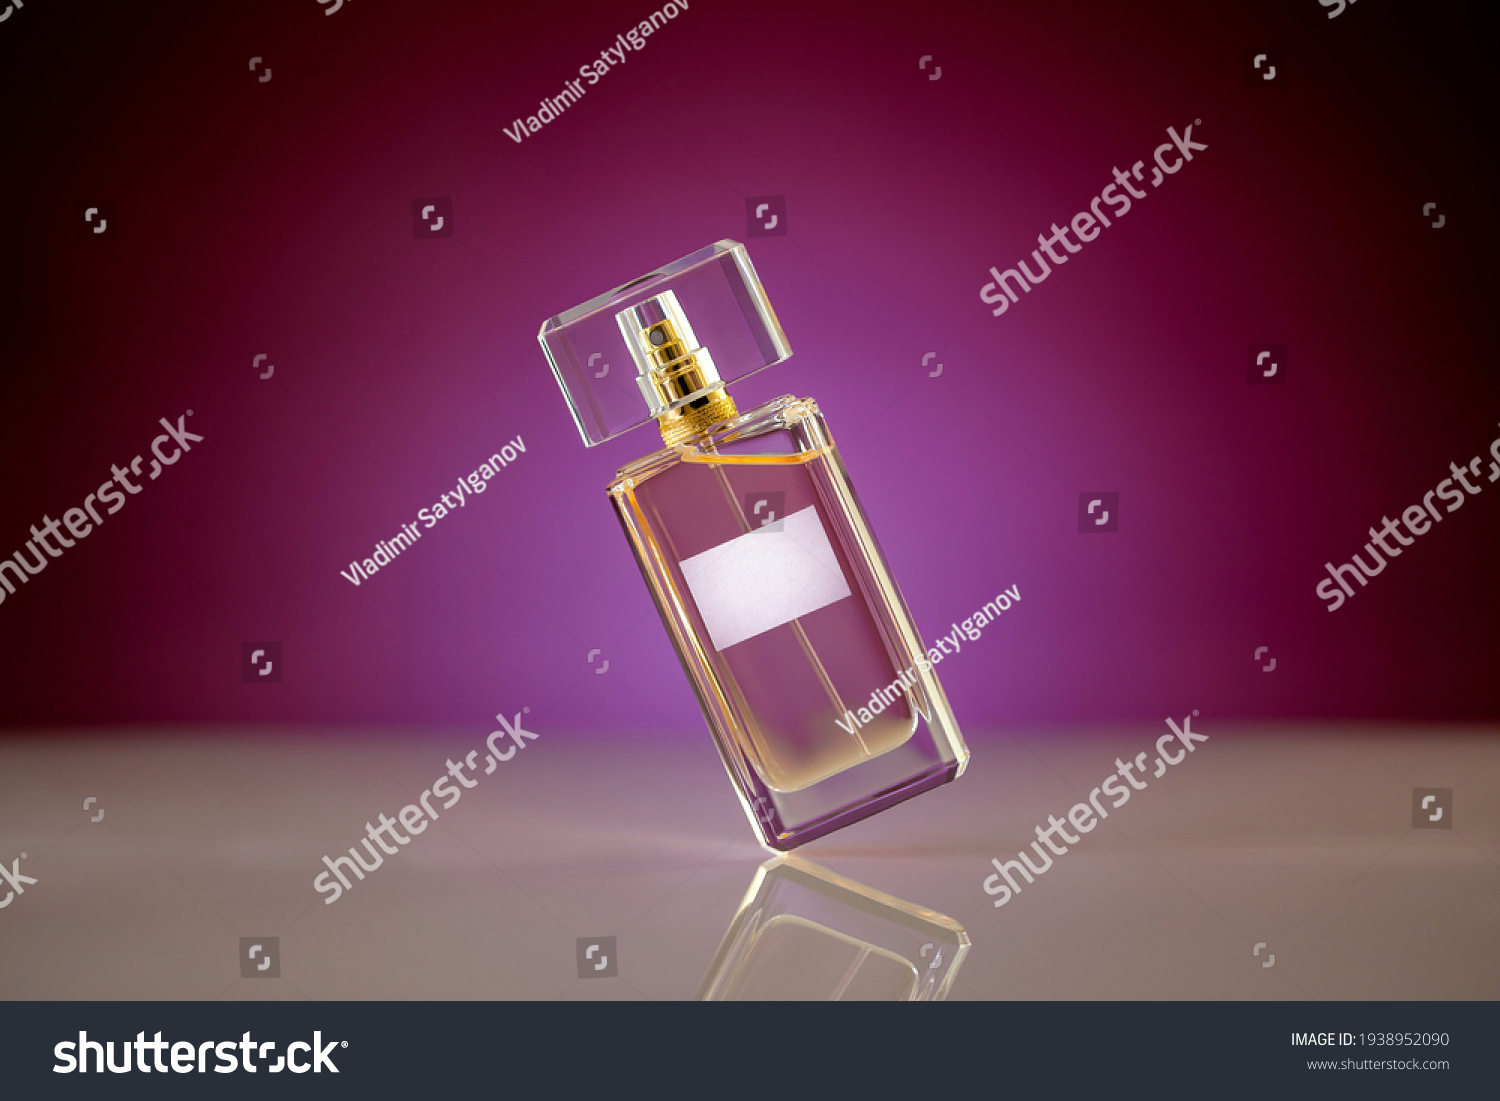 Tilted unbranded perfume bottle on glassy surface, magenta gradient background. Beauty and fashion concept #1938952090